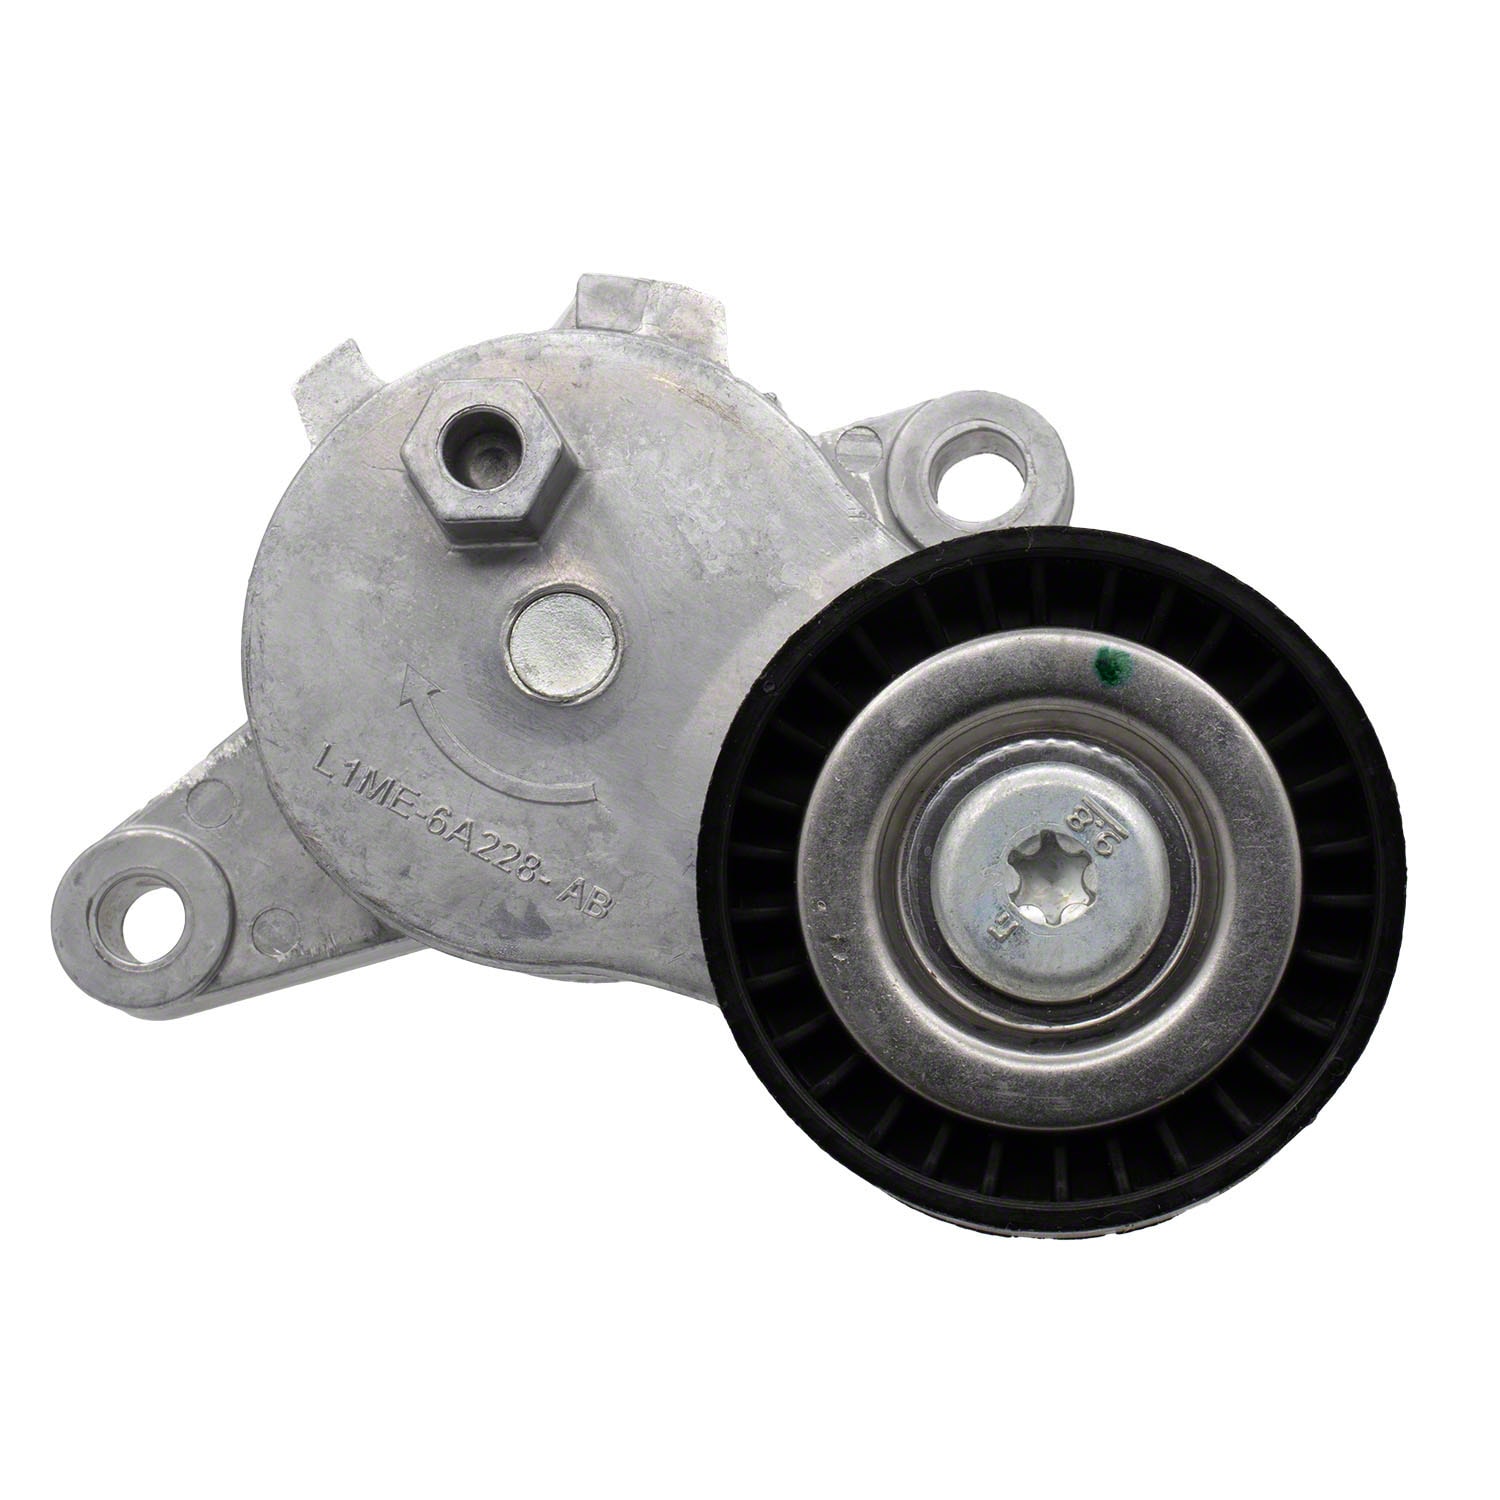 Belt Tensioners - Ford® Engine System Parts: FordParts.com